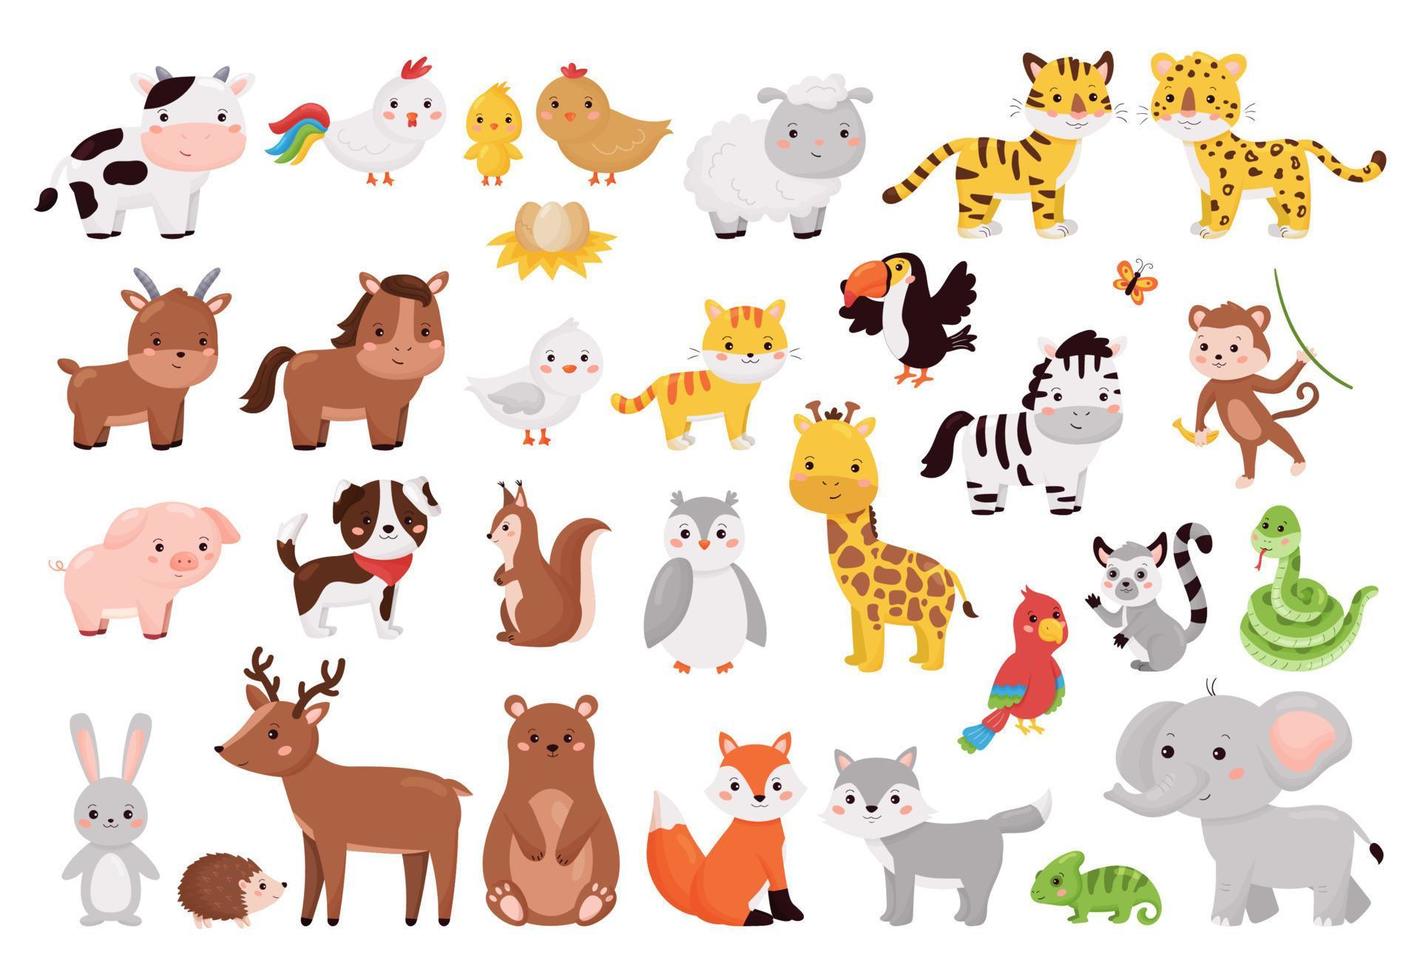 Cartoon animals and birds collection. Cute jungle, forest and farm animals set isolated on white background. vector